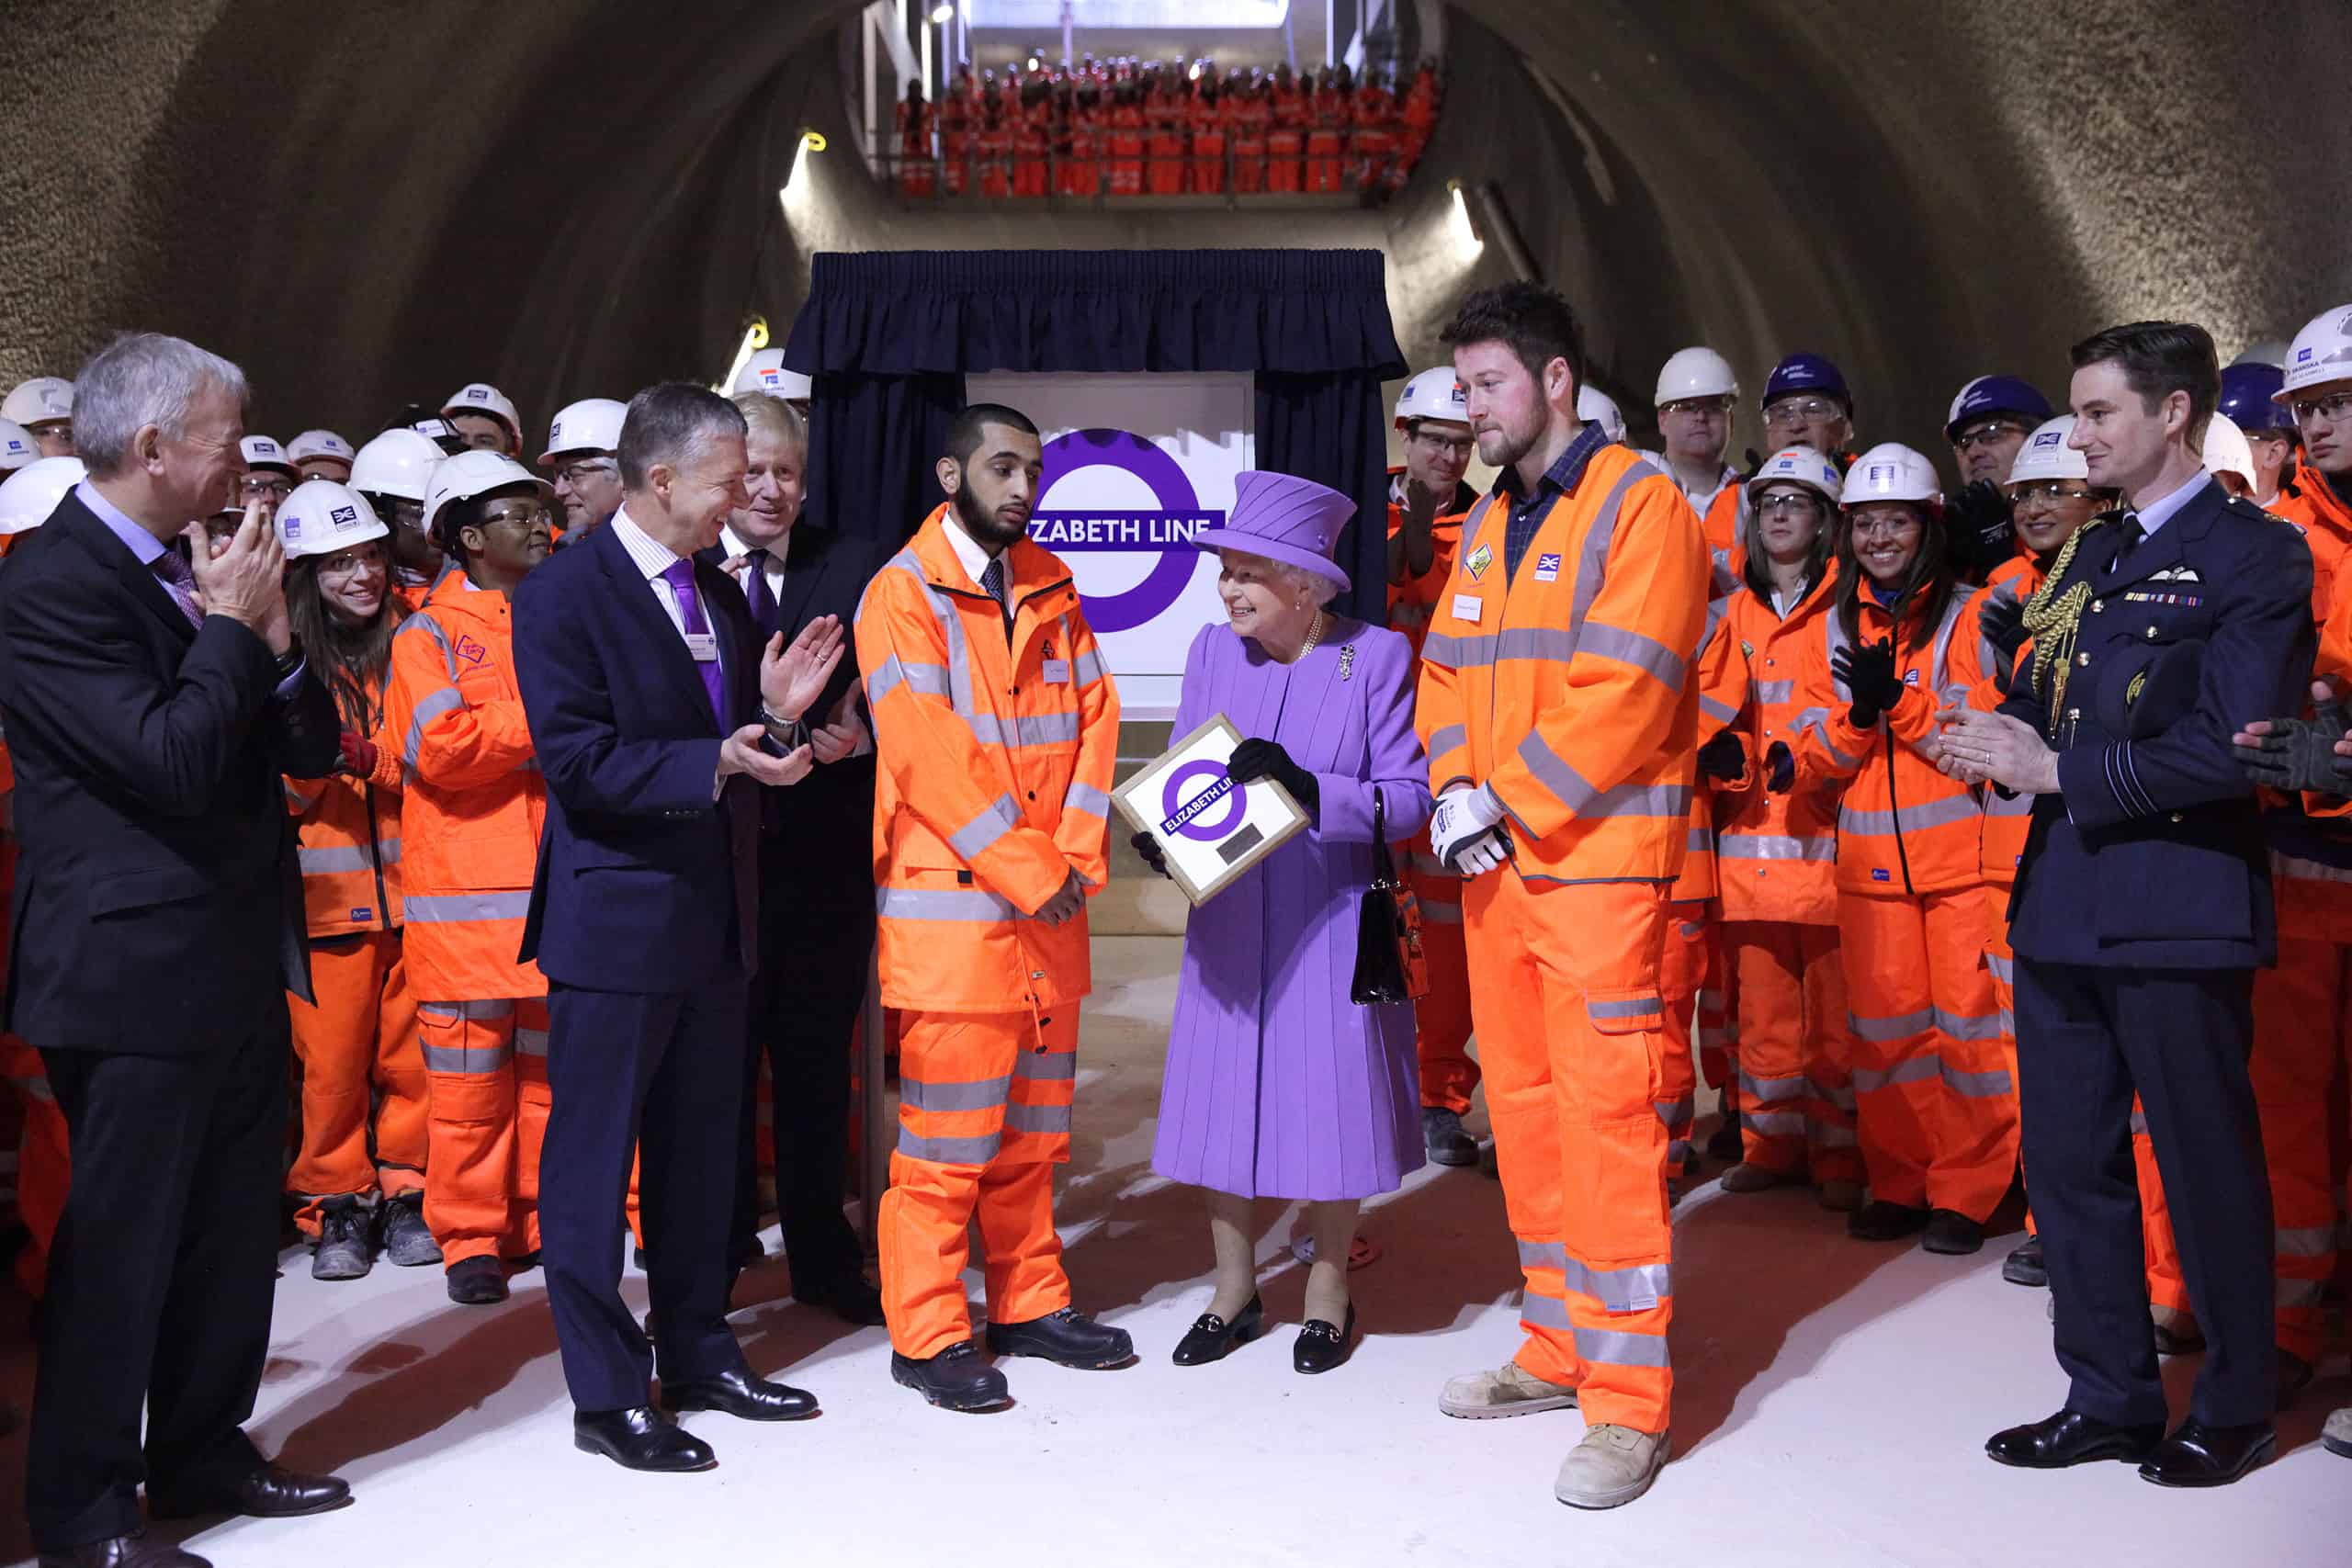 She'll probably never use it but it'll be named after her anyway: HM The Queen at the naming event for the line formerly known as Crossrail. Credit: James O Jenkins